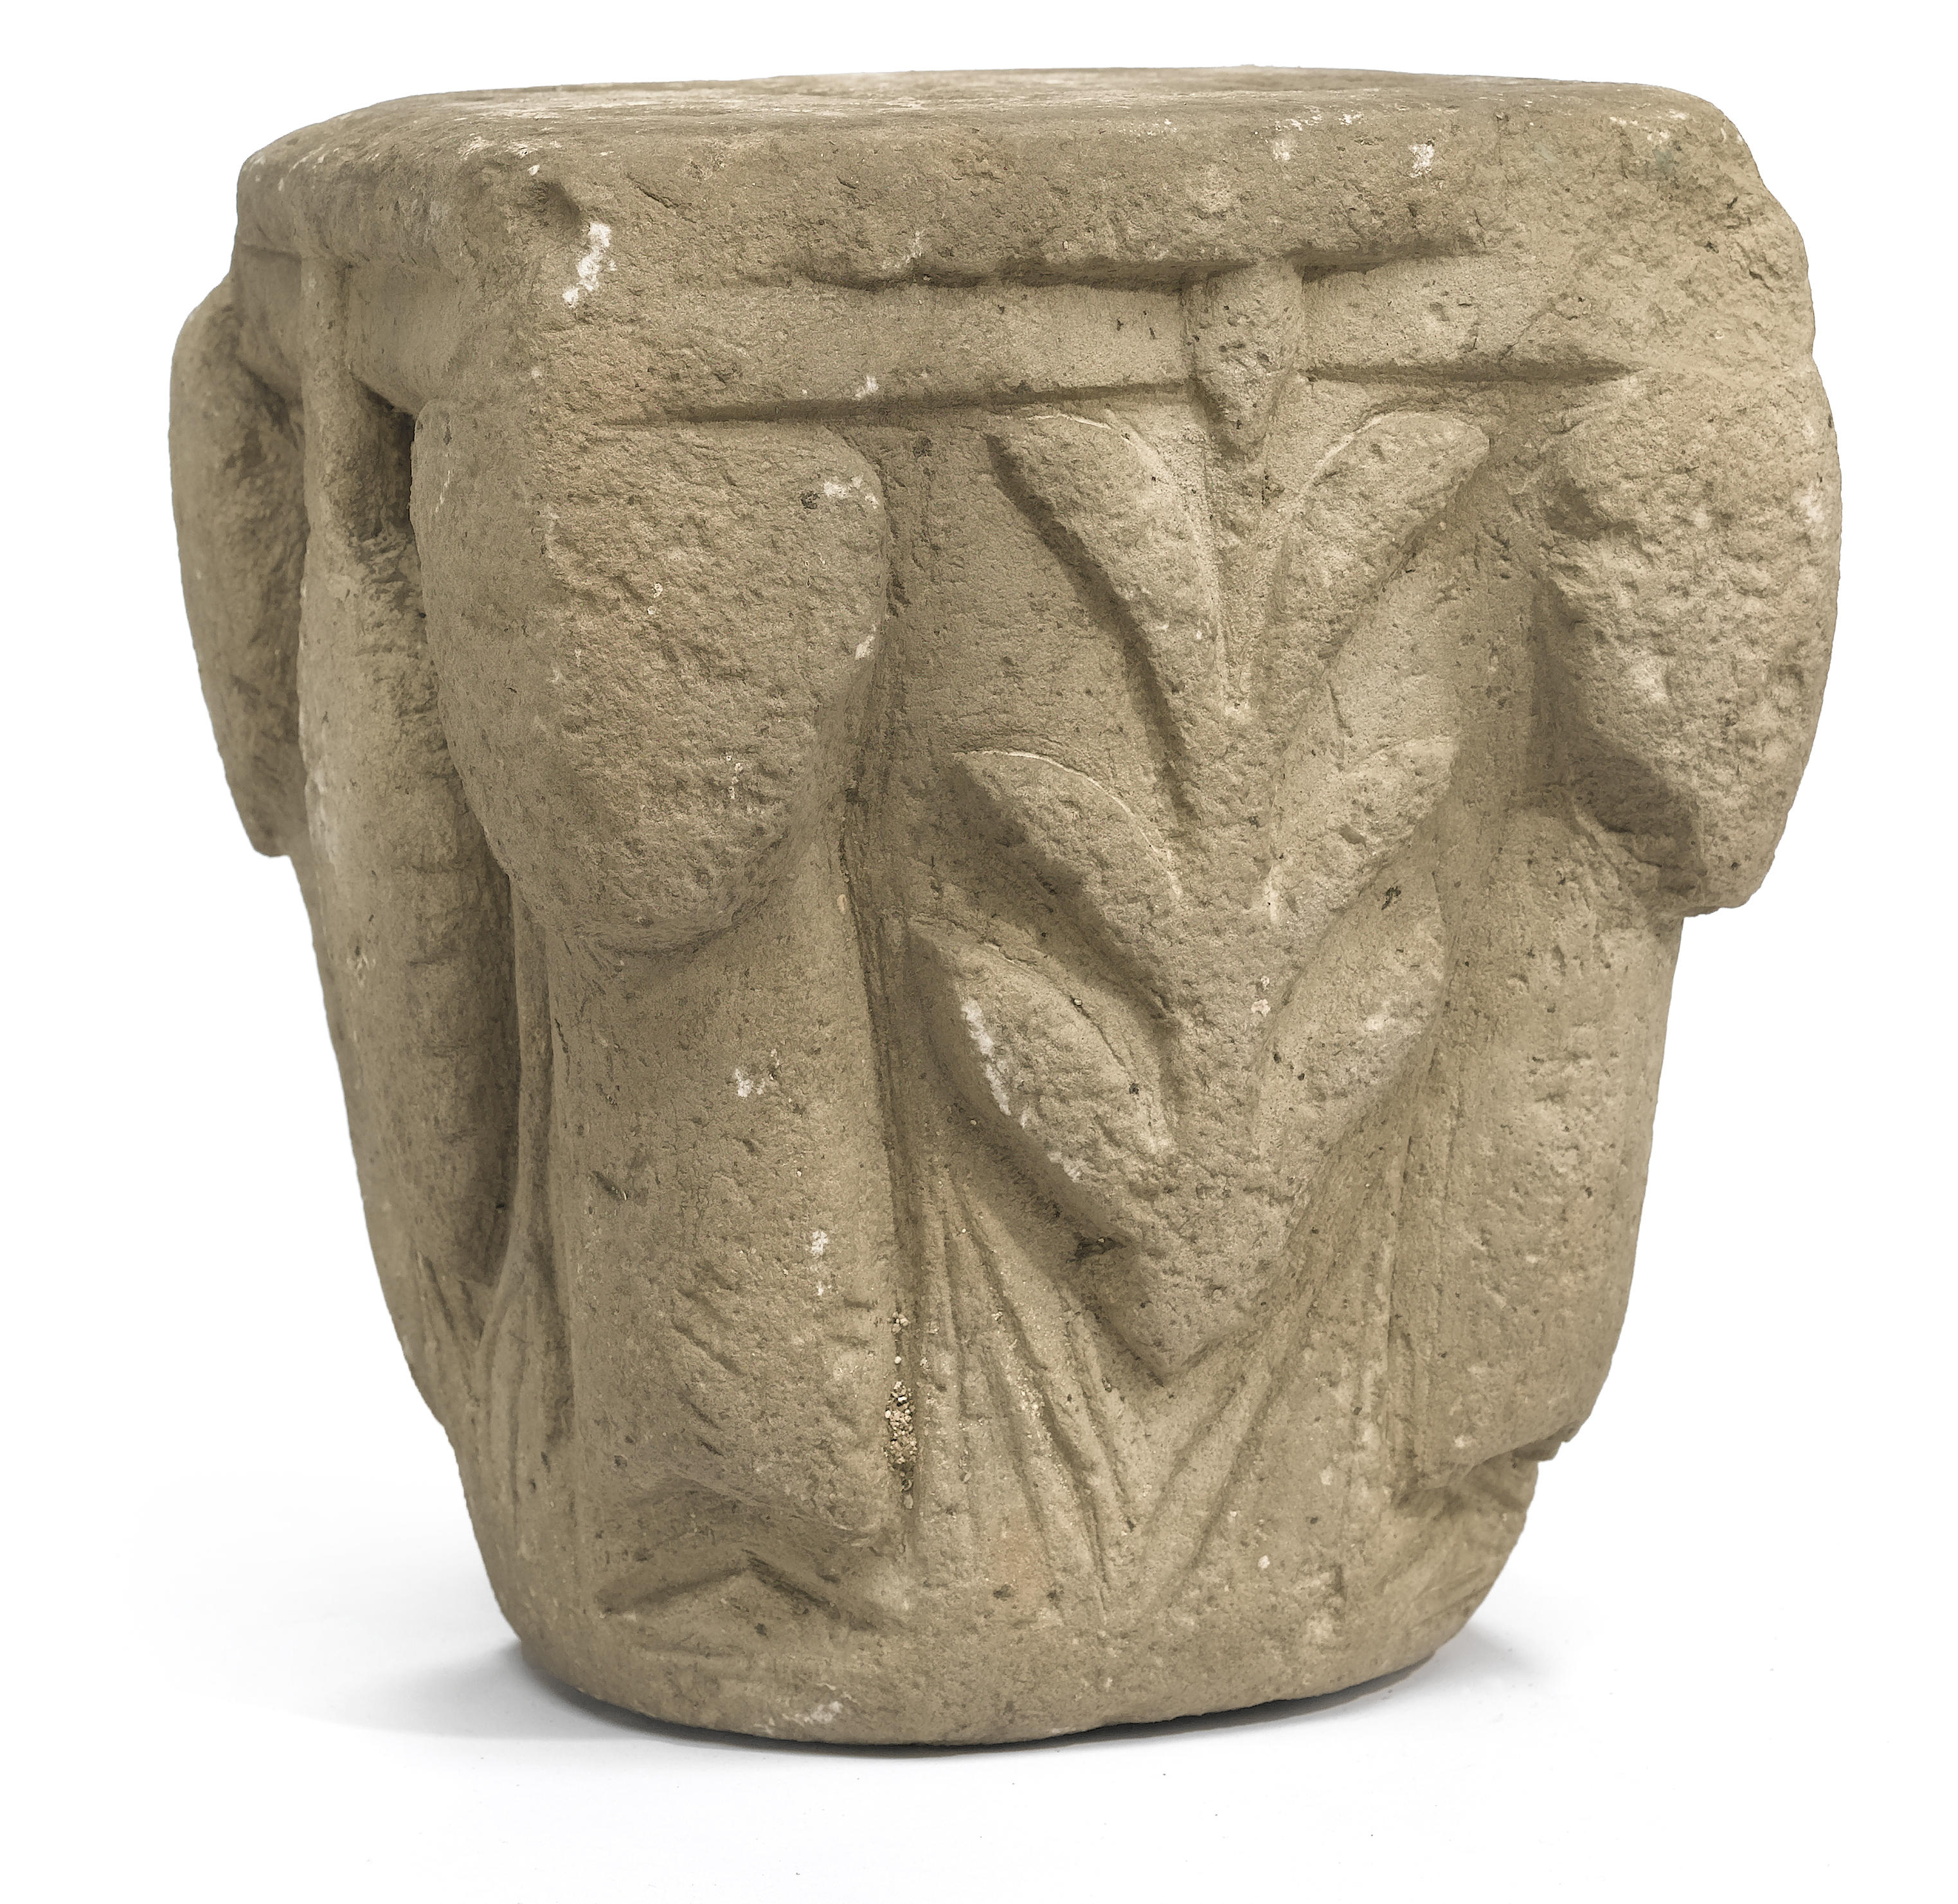 A Romanesque carved stone capital